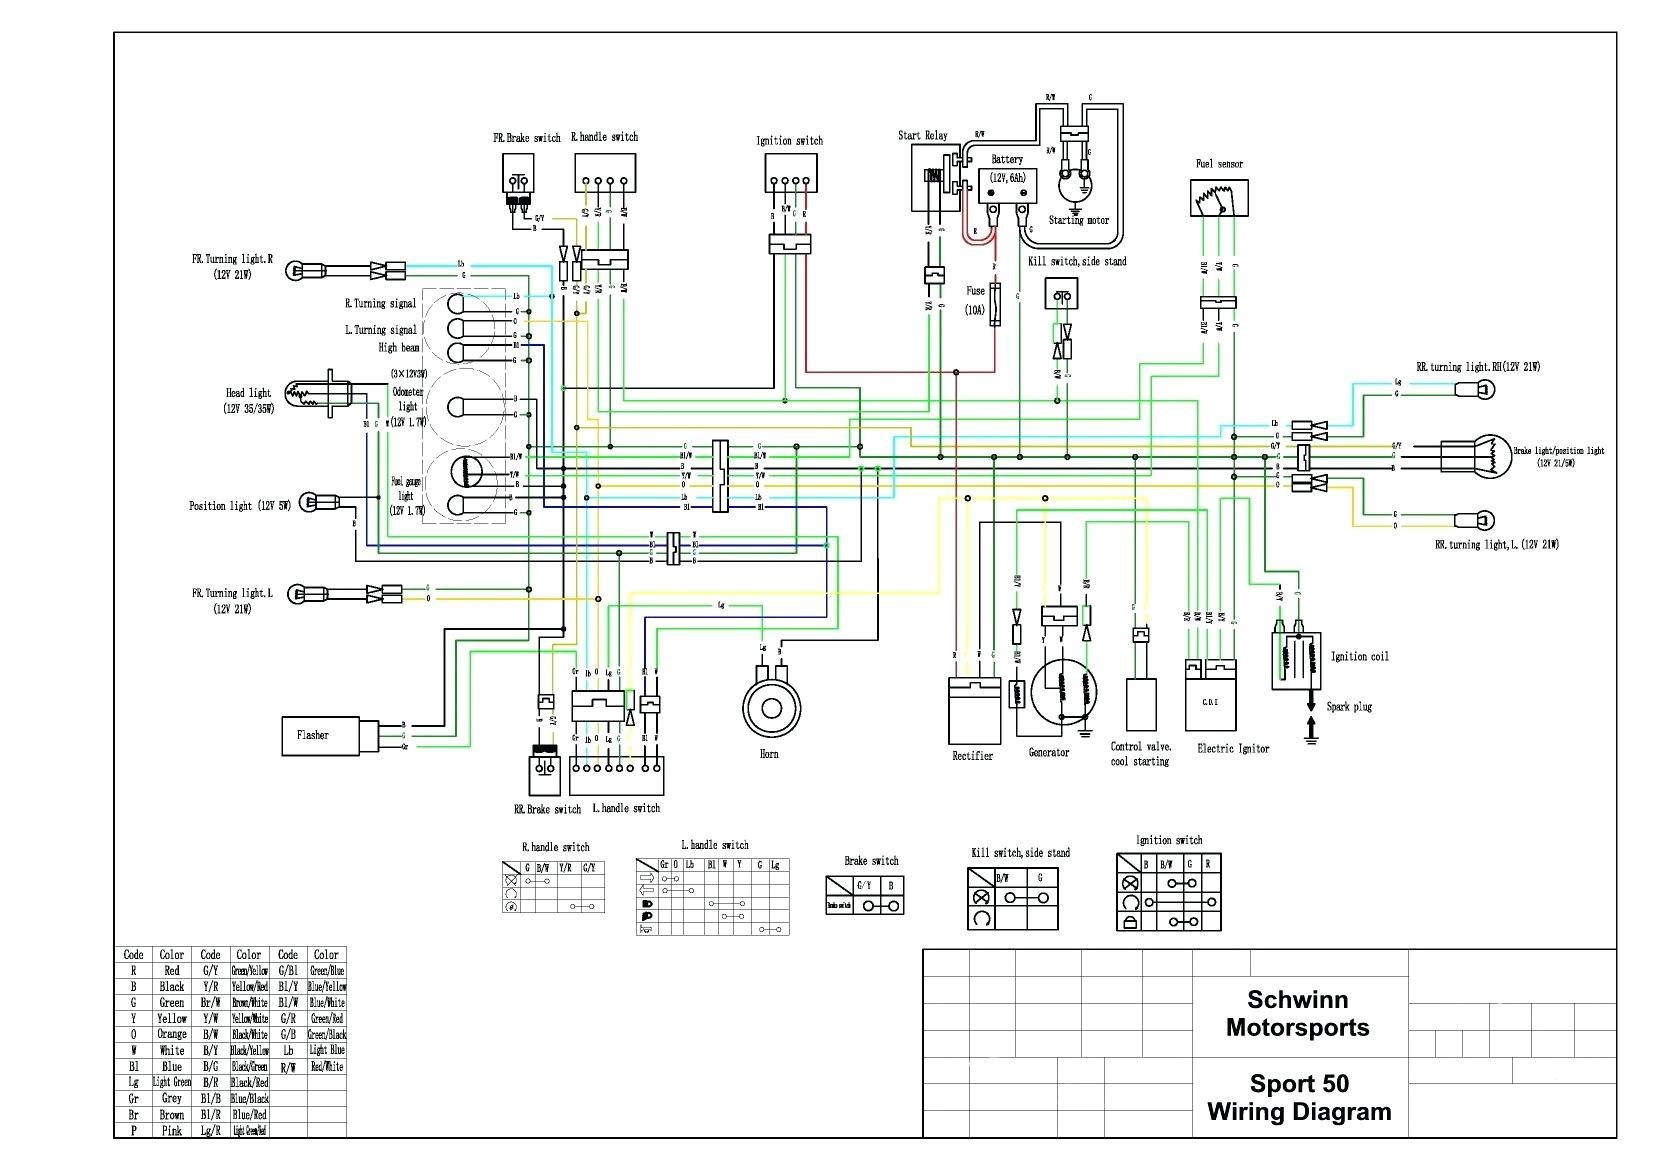 taotao 50cc scooter wiring diagram Collection Lovely Taotao 110cc Atv Wiring Diagram With Tao 125